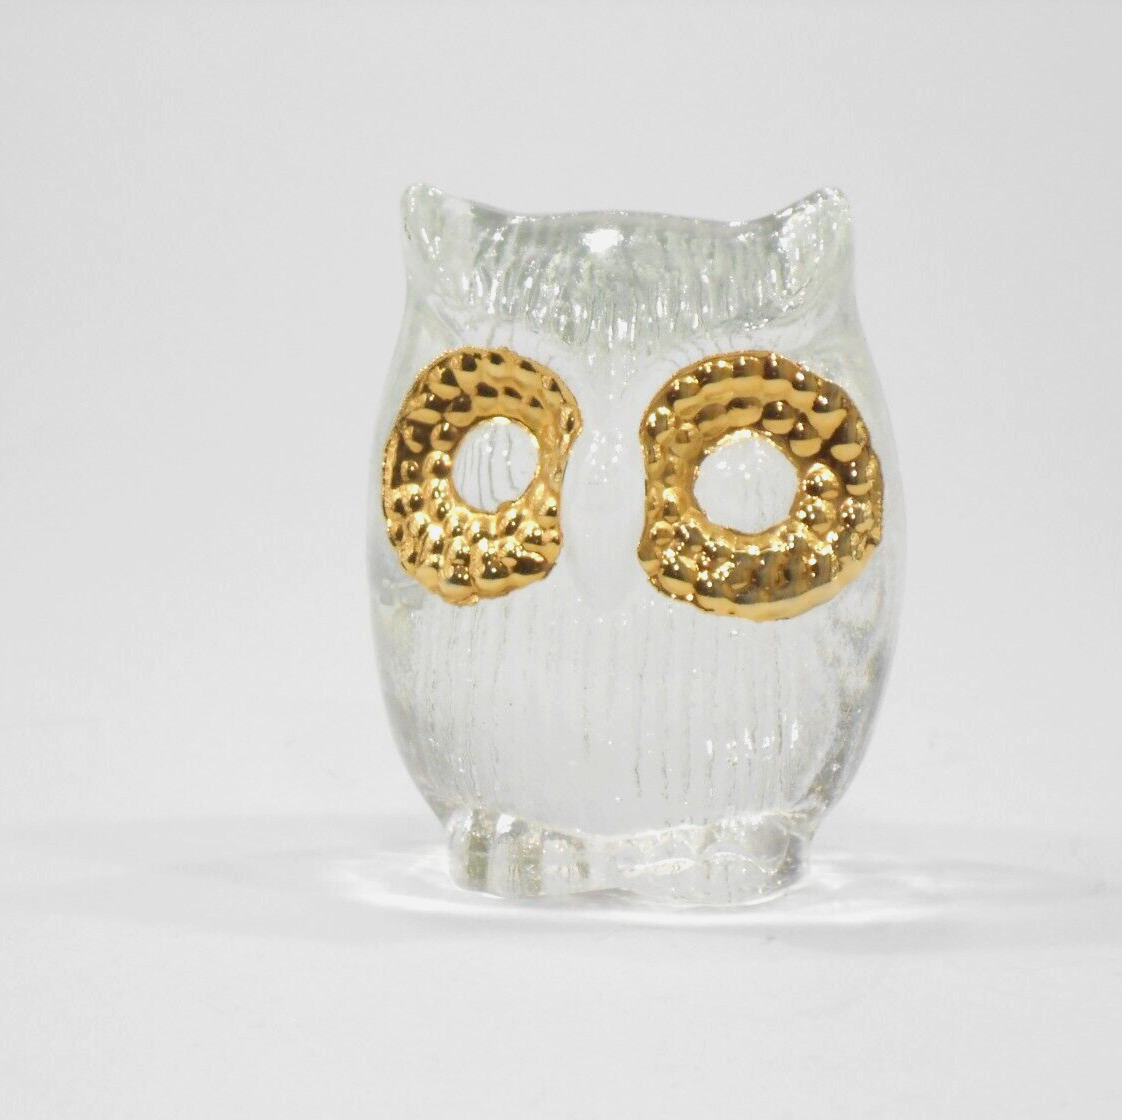 Gold Owl Figurine Mid-Century Desk Art Paperweight Home Decor Clear Resin